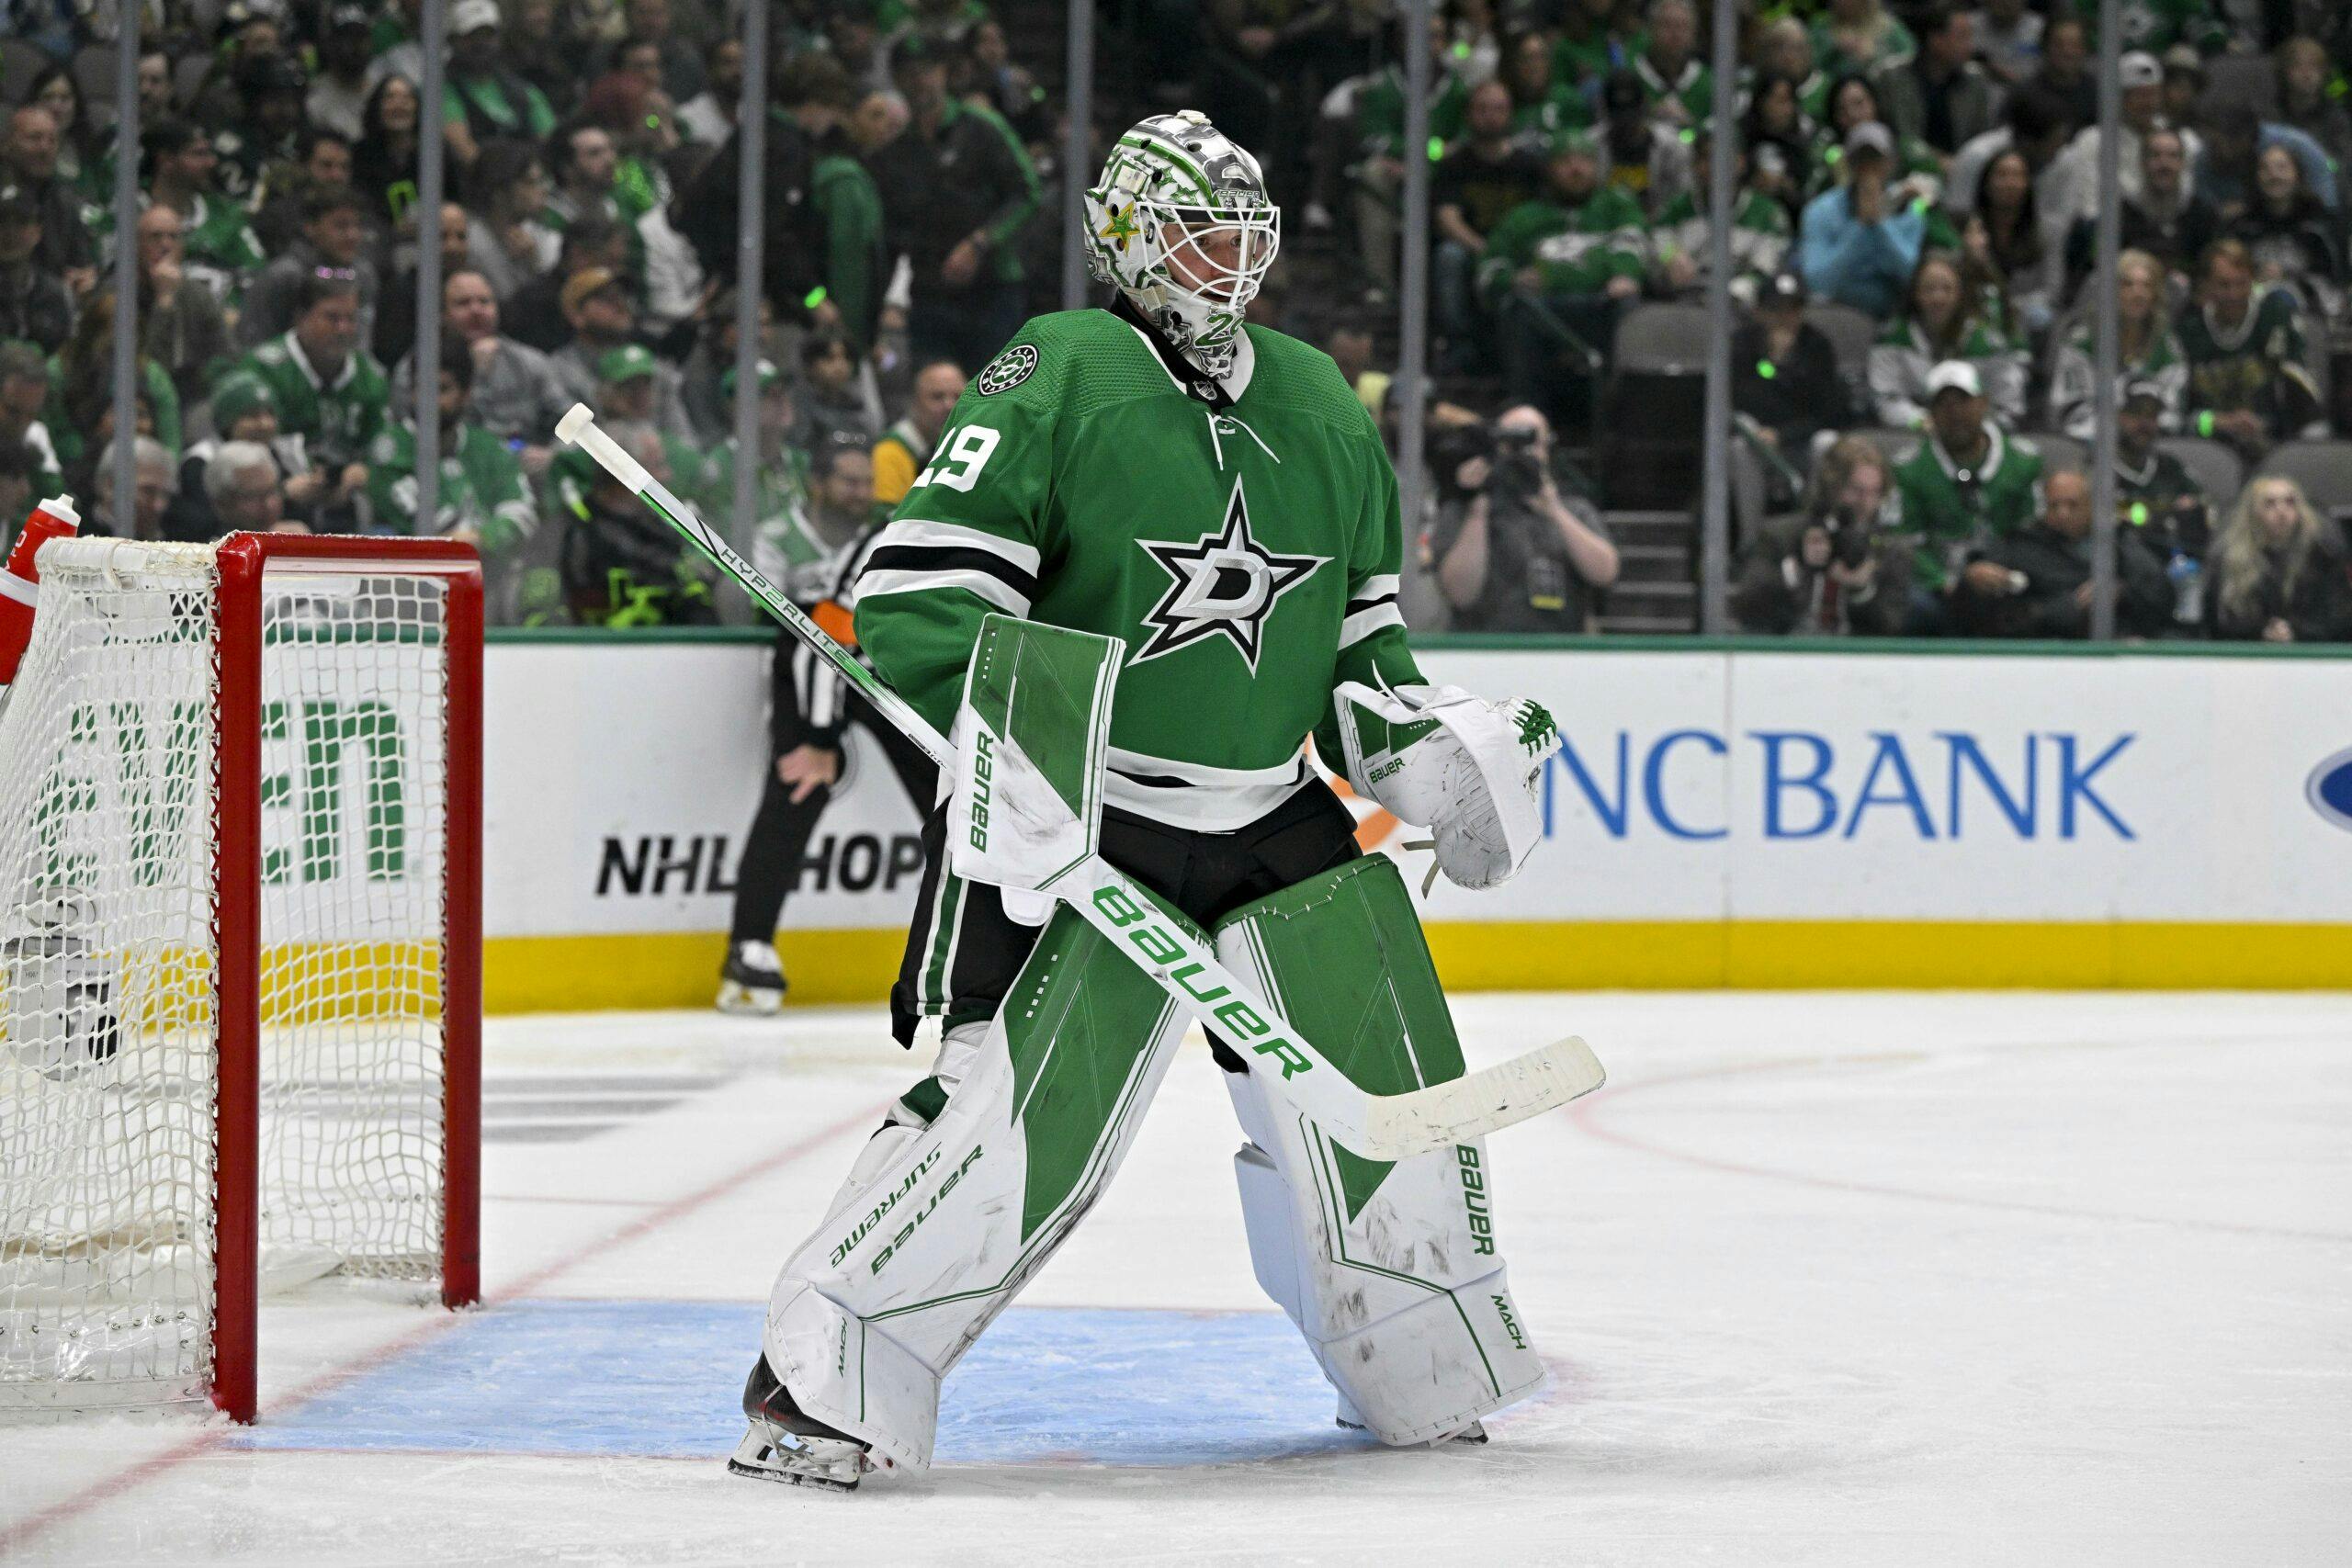 Dallas Stars need to limit mistakes to avoid major series deficit